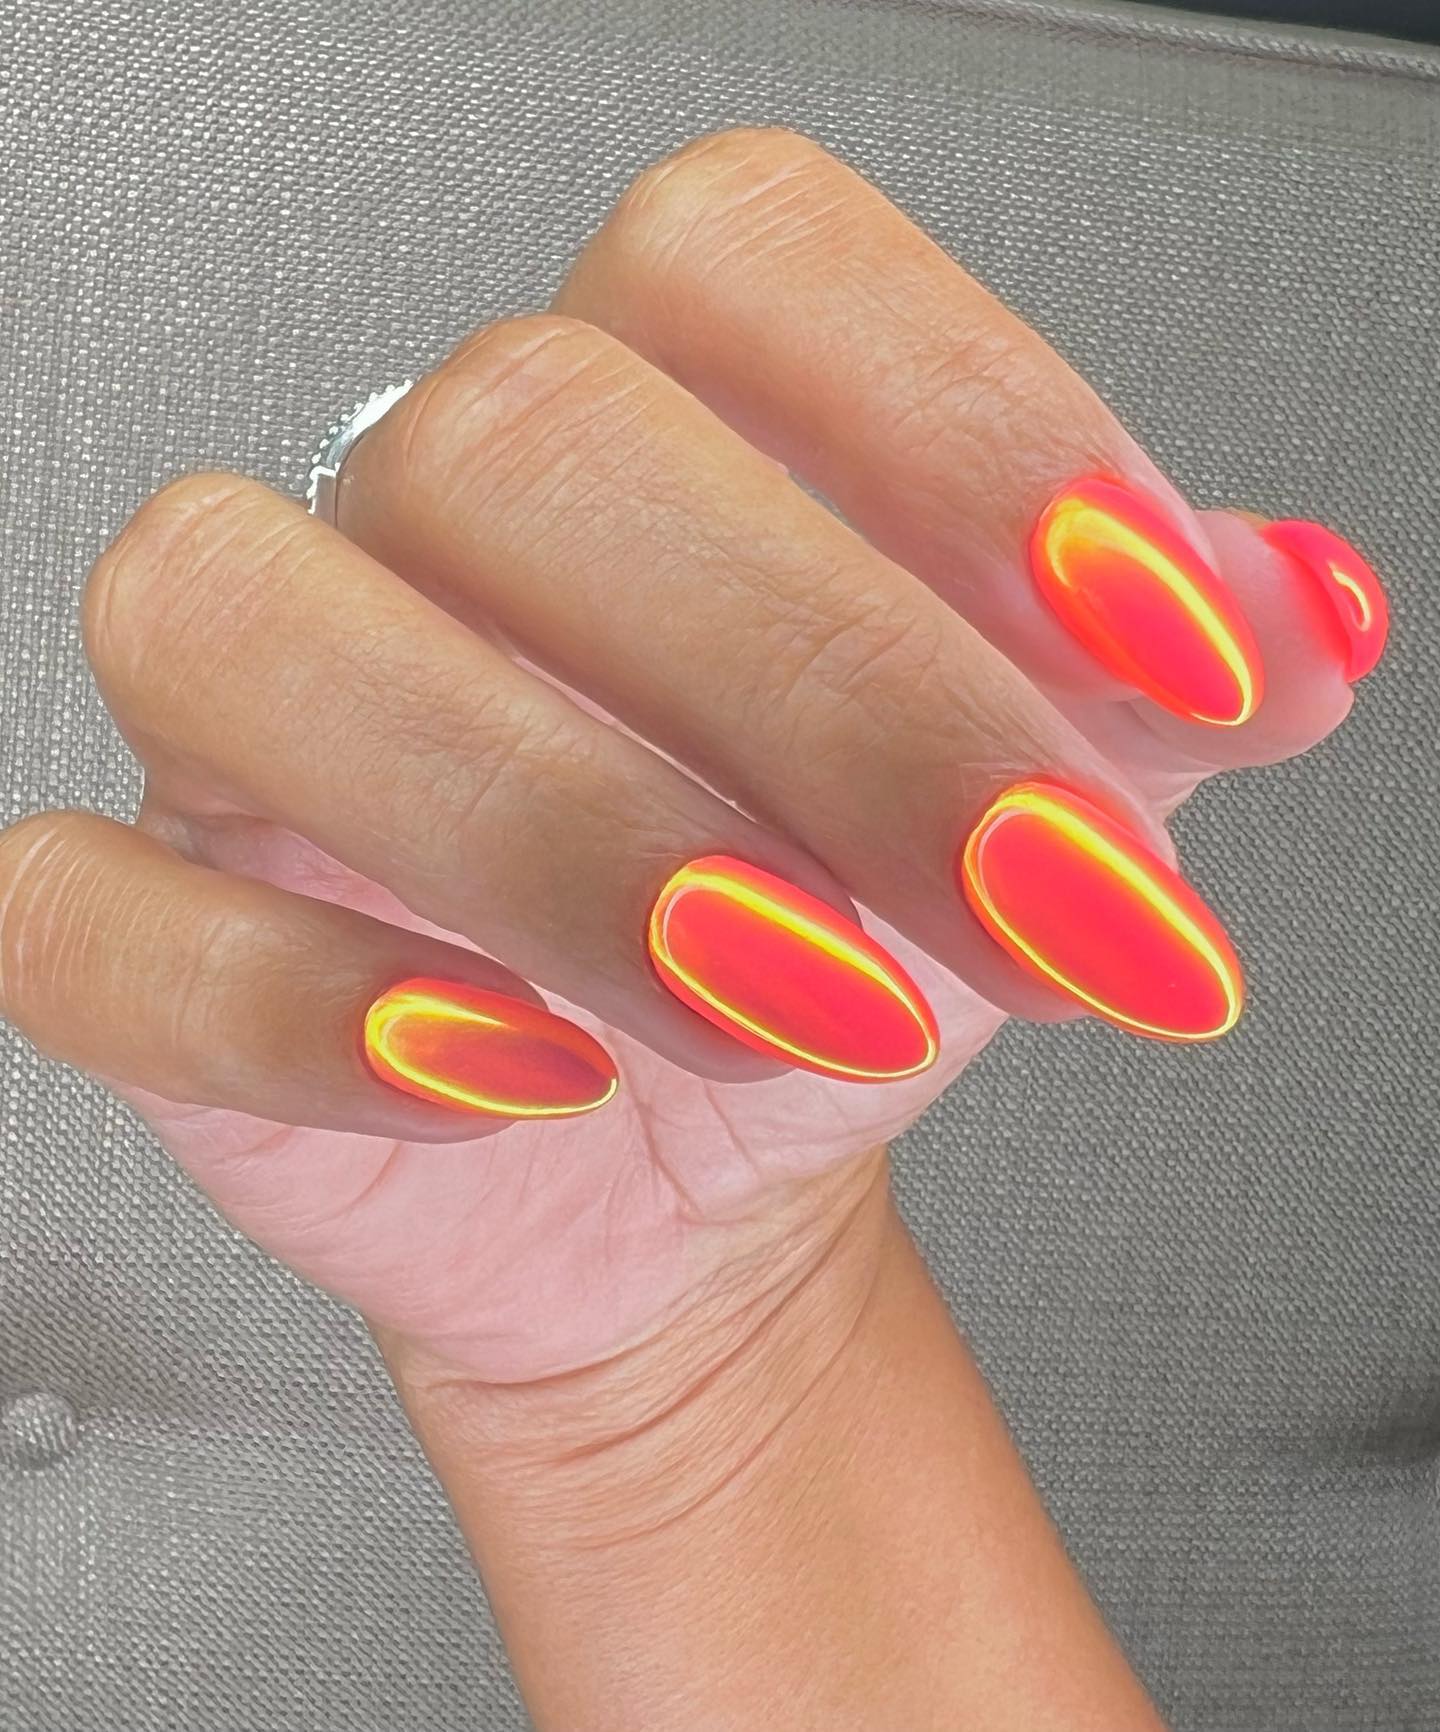 These nails are so fun! If you are looking for nice summer nail color ideas, why don't you try orange chrome mani?